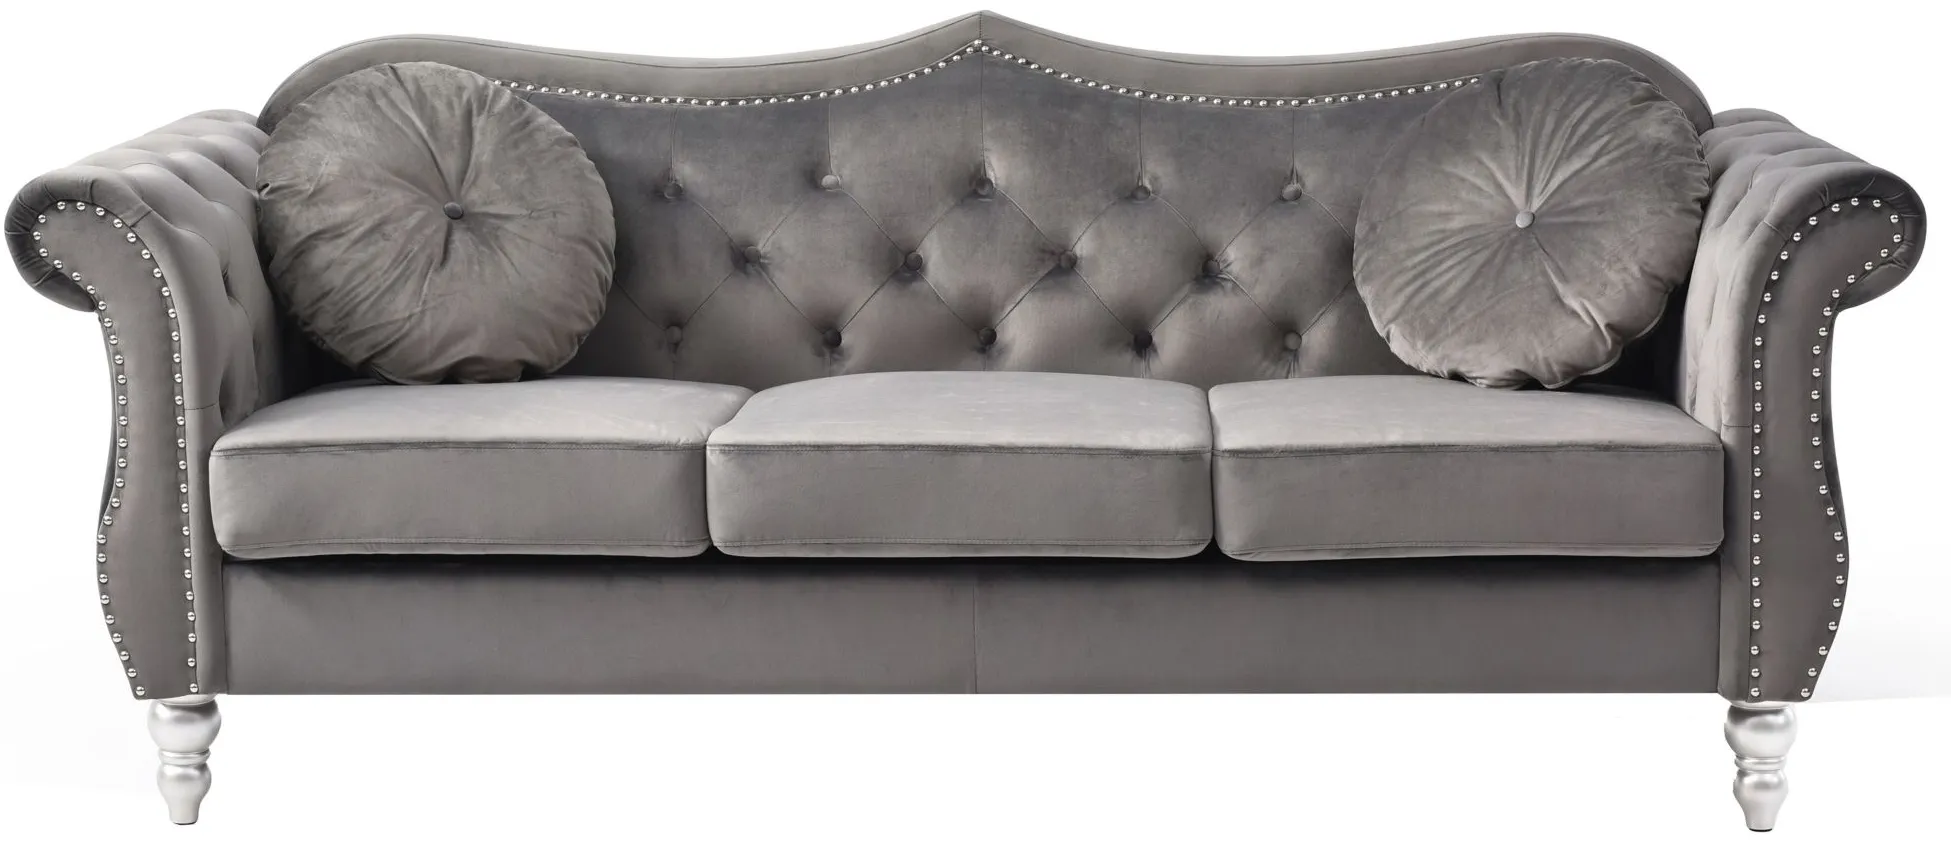 Hollywood Sofa in Dark Gray by Glory Furniture